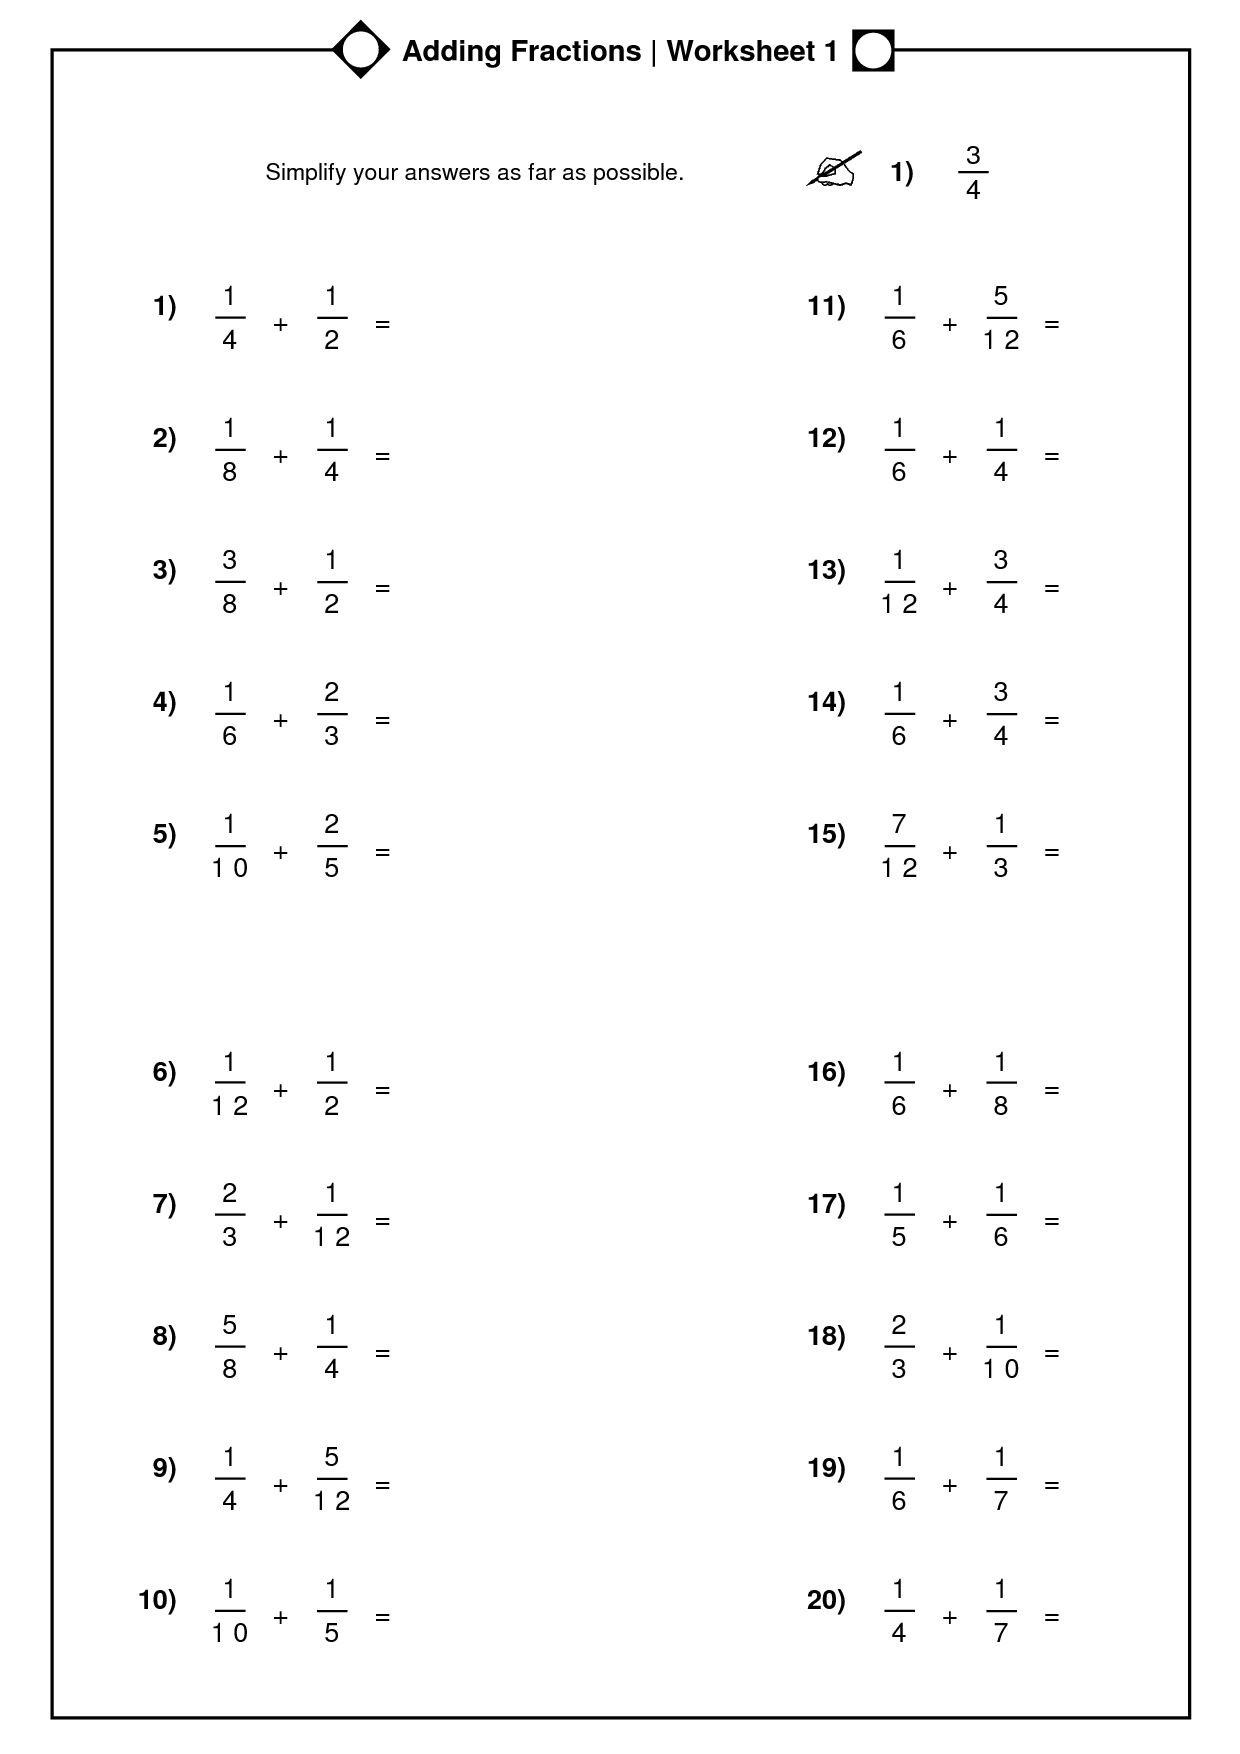 adding-and-subtracting-mixed-fractions-a-fractions-fractions-mixed-number-addition-worksheets